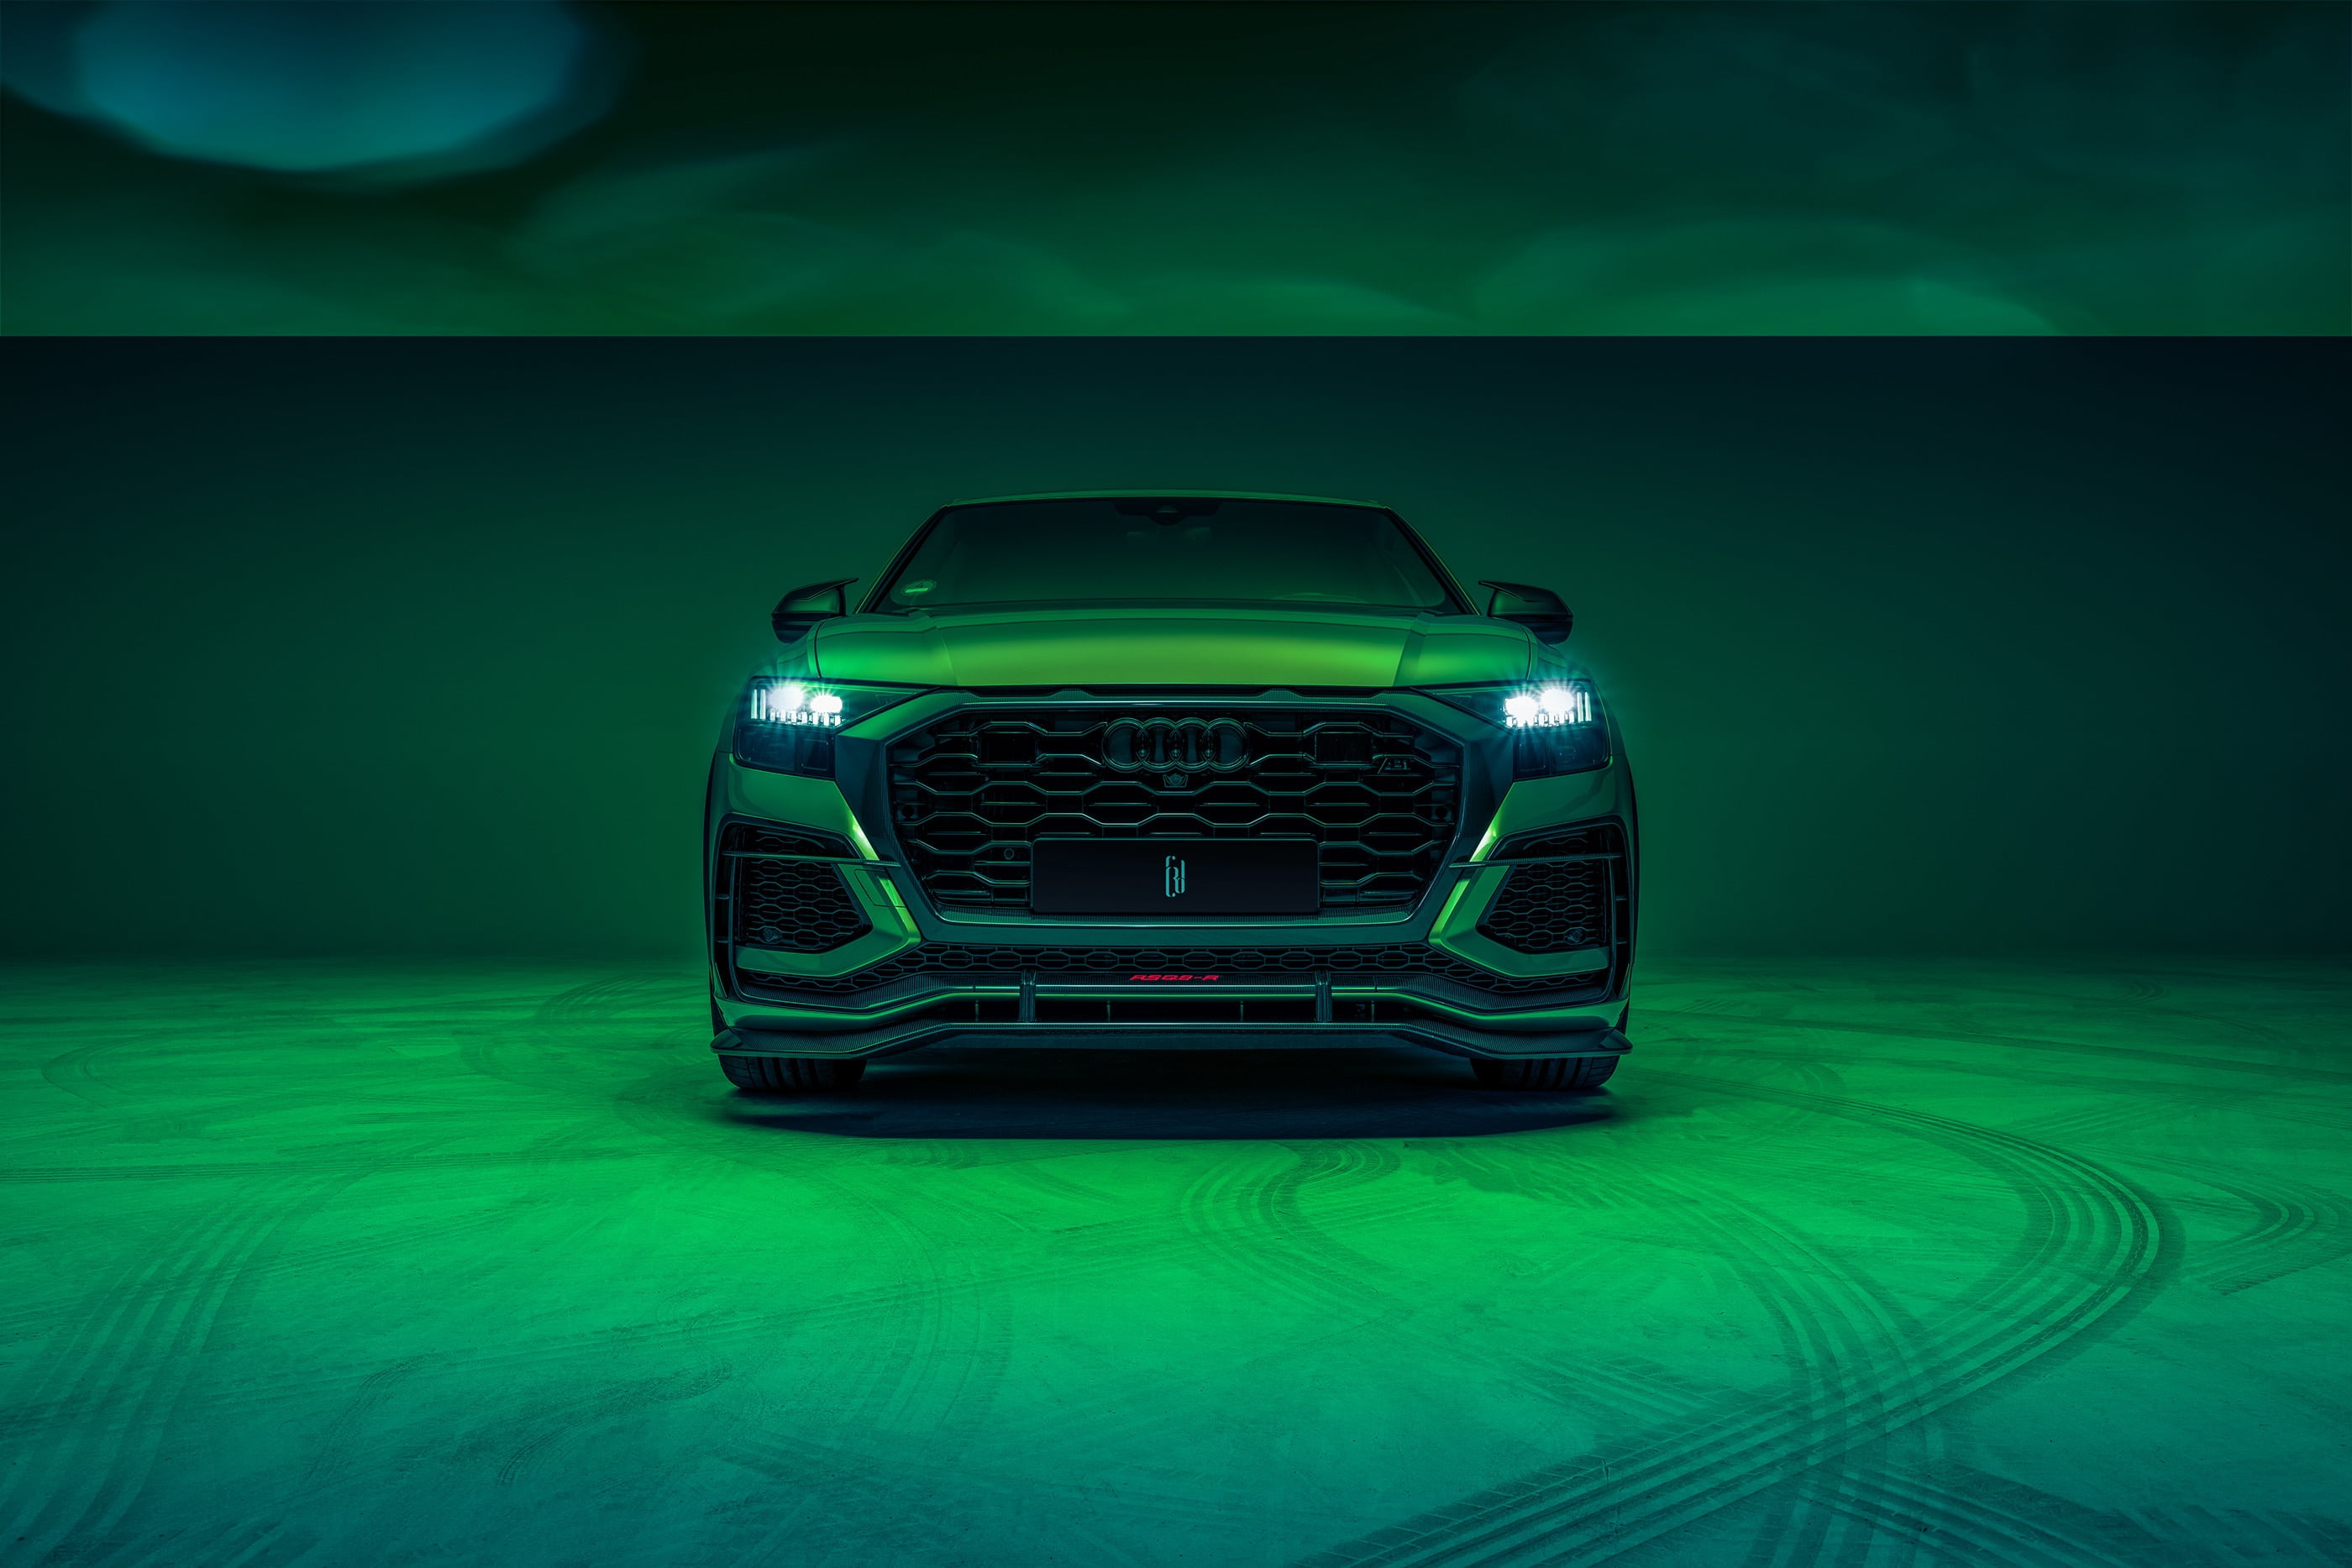 Audi, green, before, tuning Studio, ABBOT, kit, Crossover, RSQ8-R